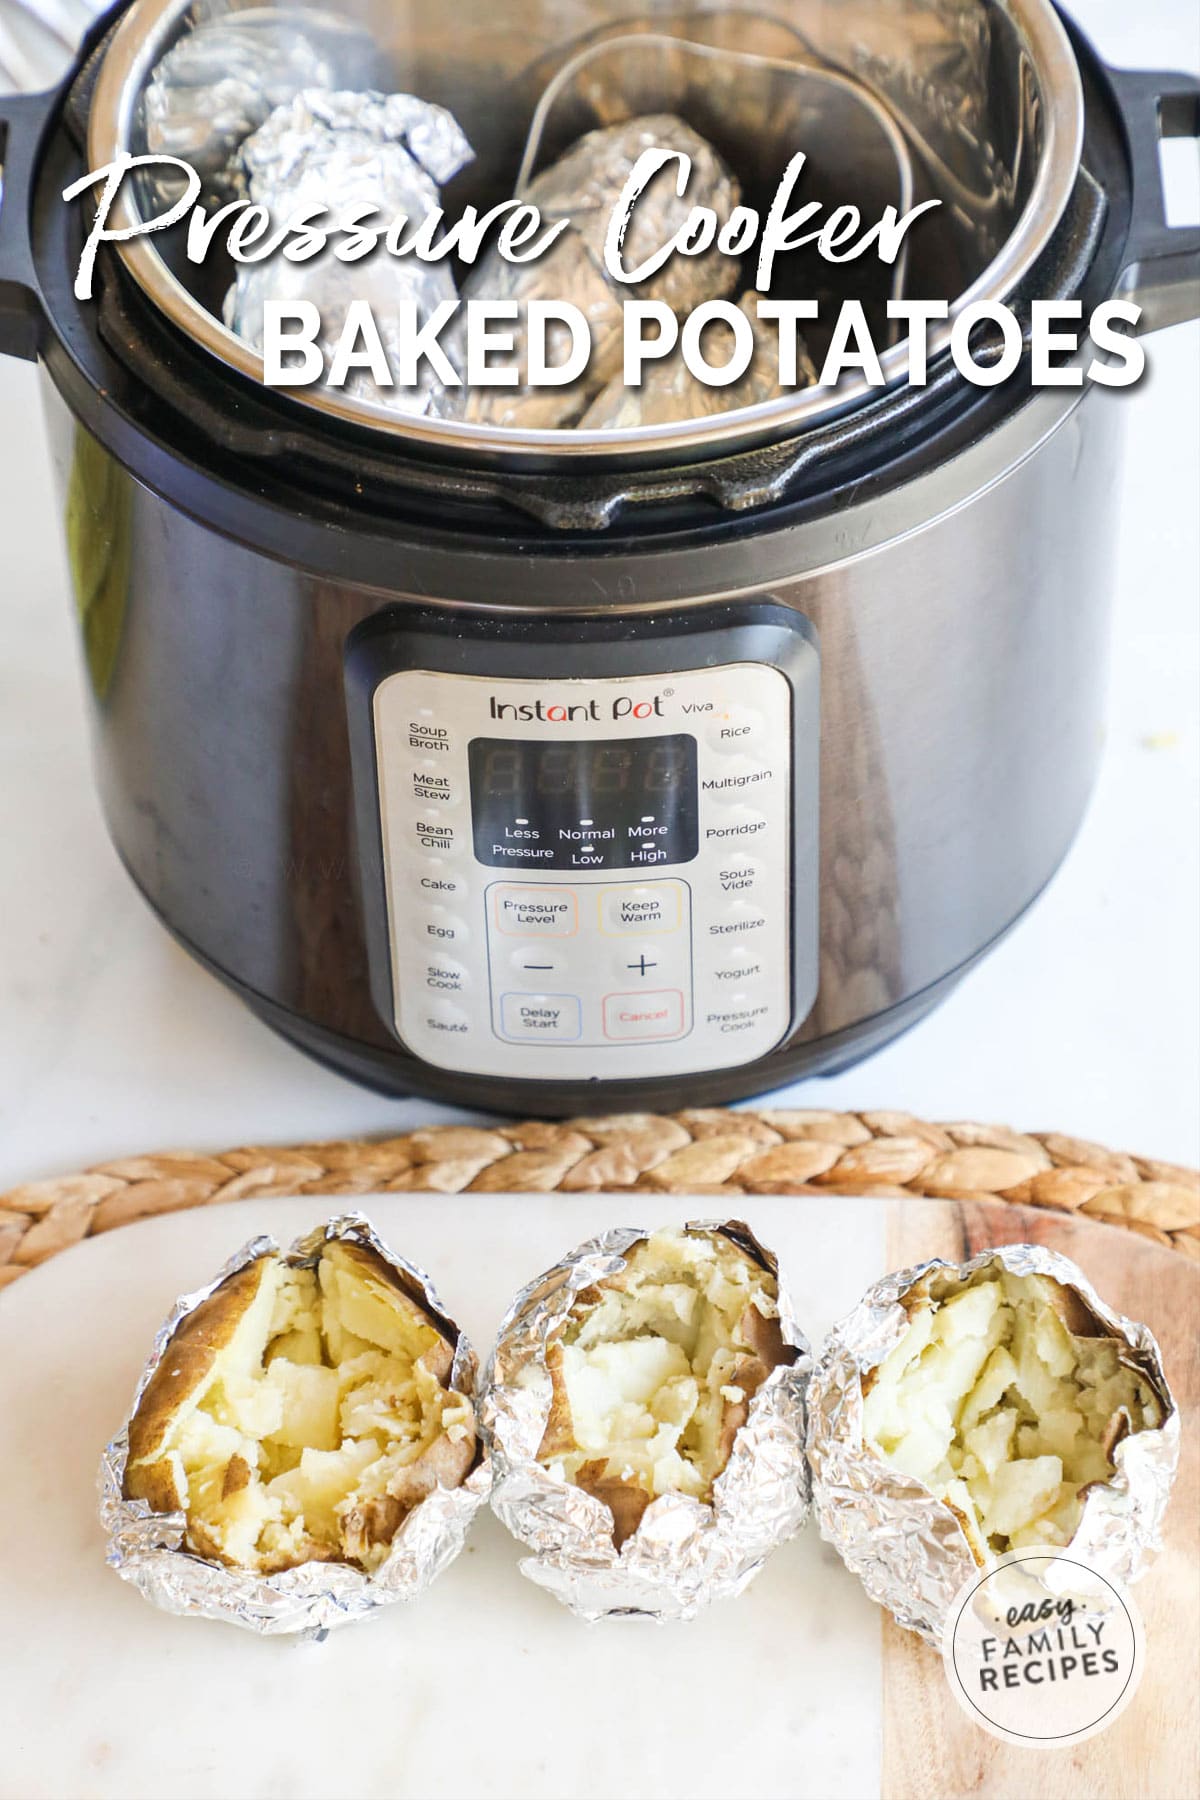 Image of 4 potatoes half wrapped in foil in front of an Instant Pot.